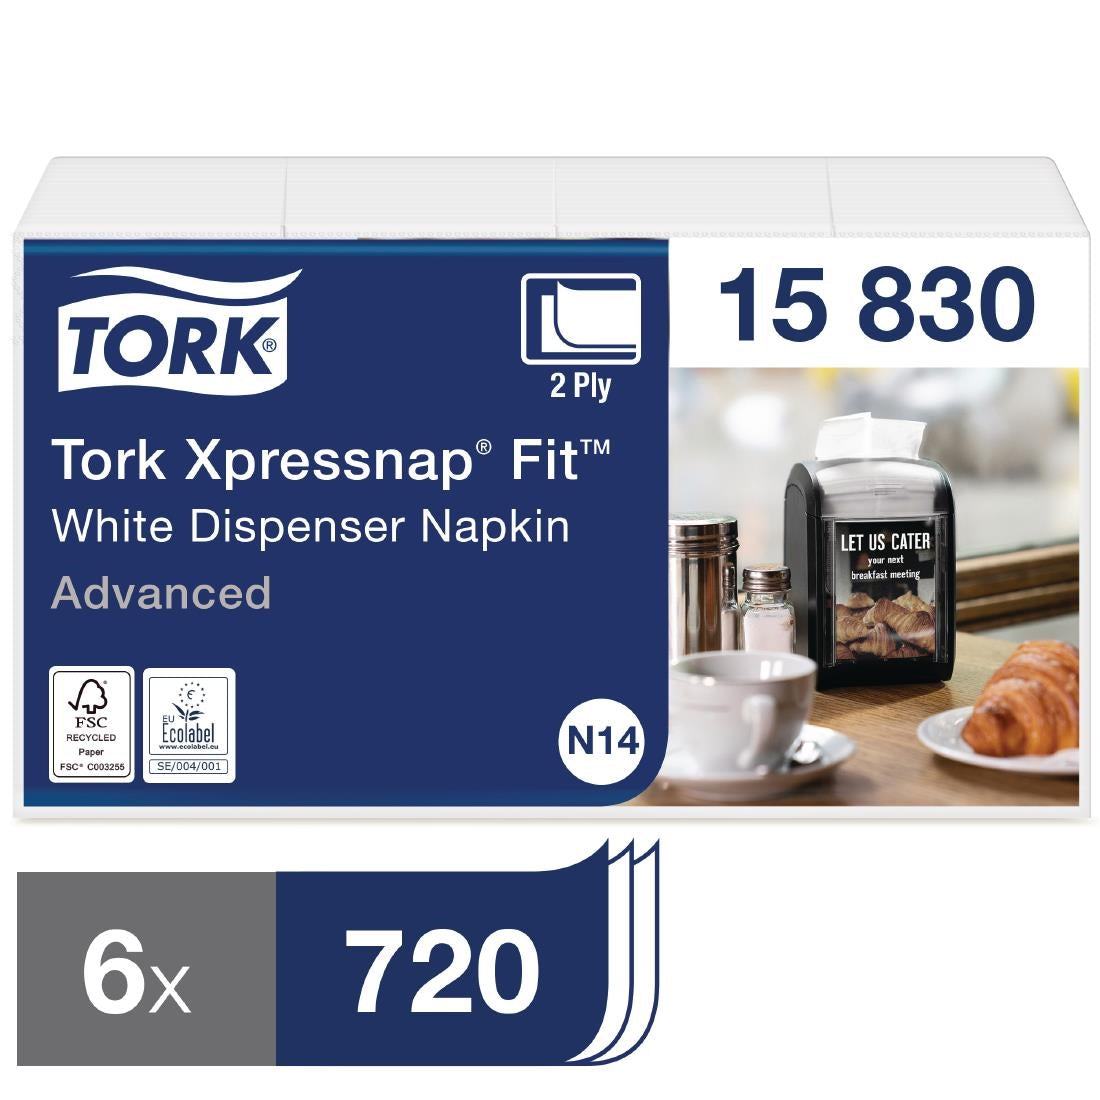 FS373 Tork Xpressnap Fit Recycled Dispenser Napkin White 2Ply (Pack of 6x720) JD Catering Equipment Solutions Ltd